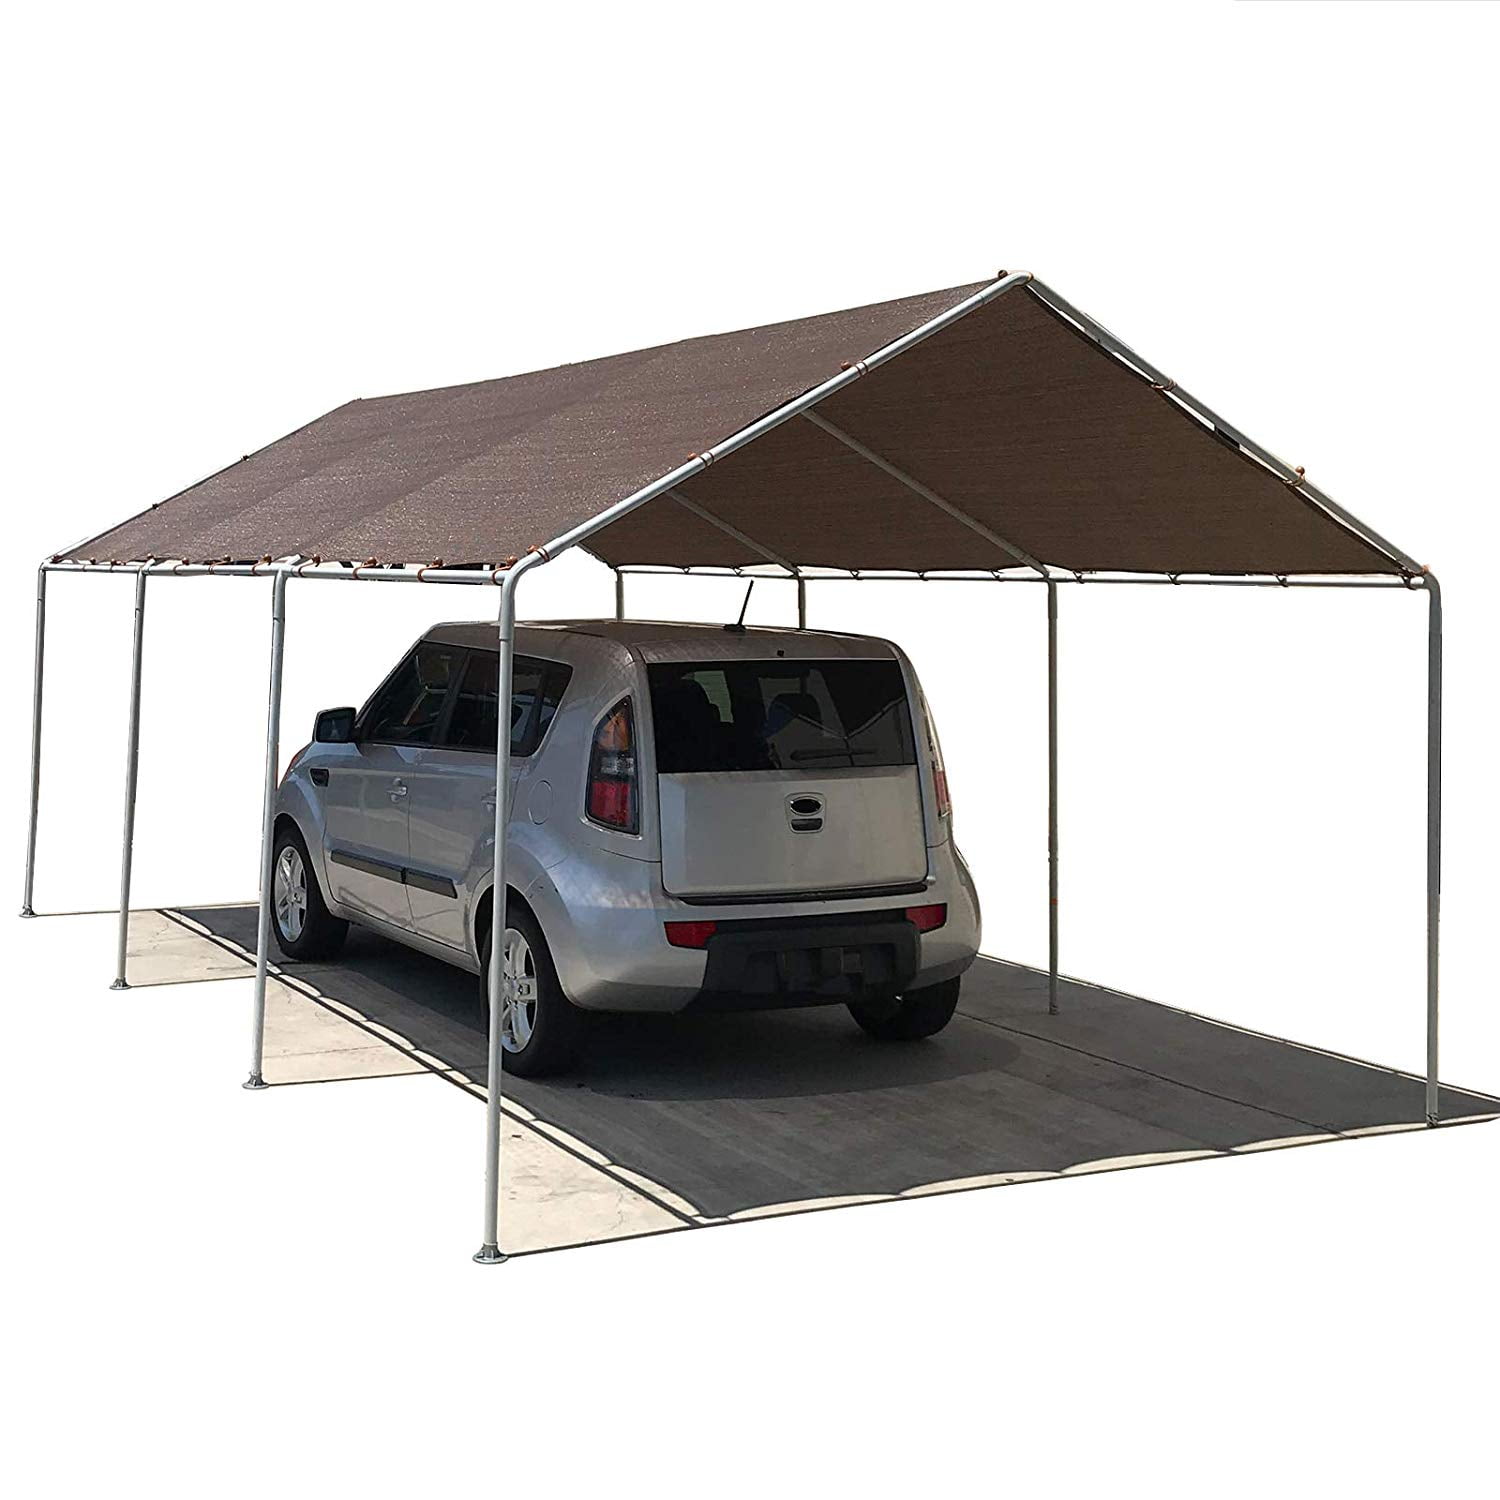 Set Protection Corners and Spacer for Roof Tarpaulin Cover for Caravan & Motorhome